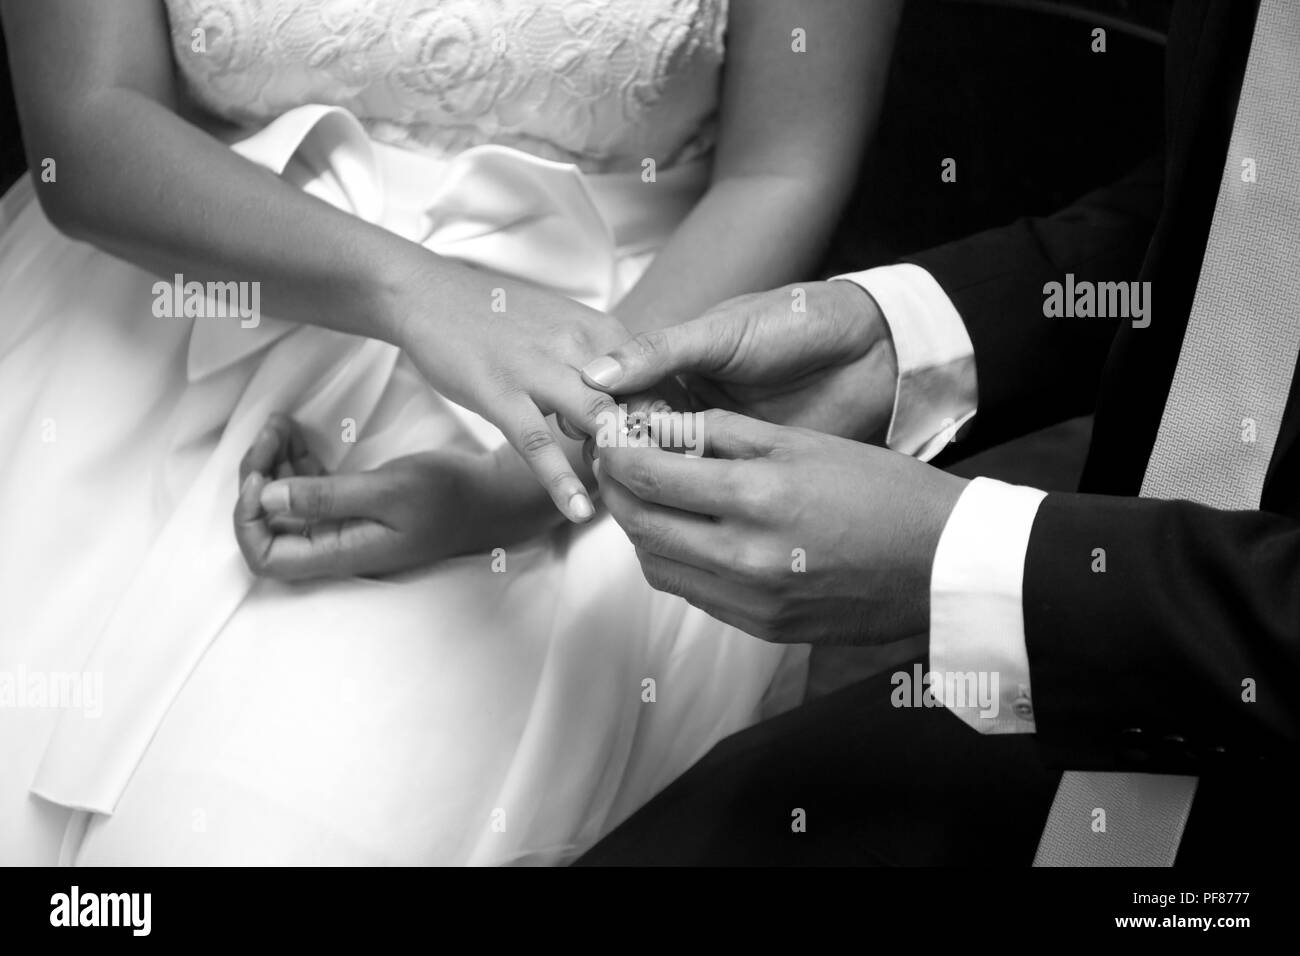 Groom putting a wedding ring on bride's finger in black and white Stock Photo